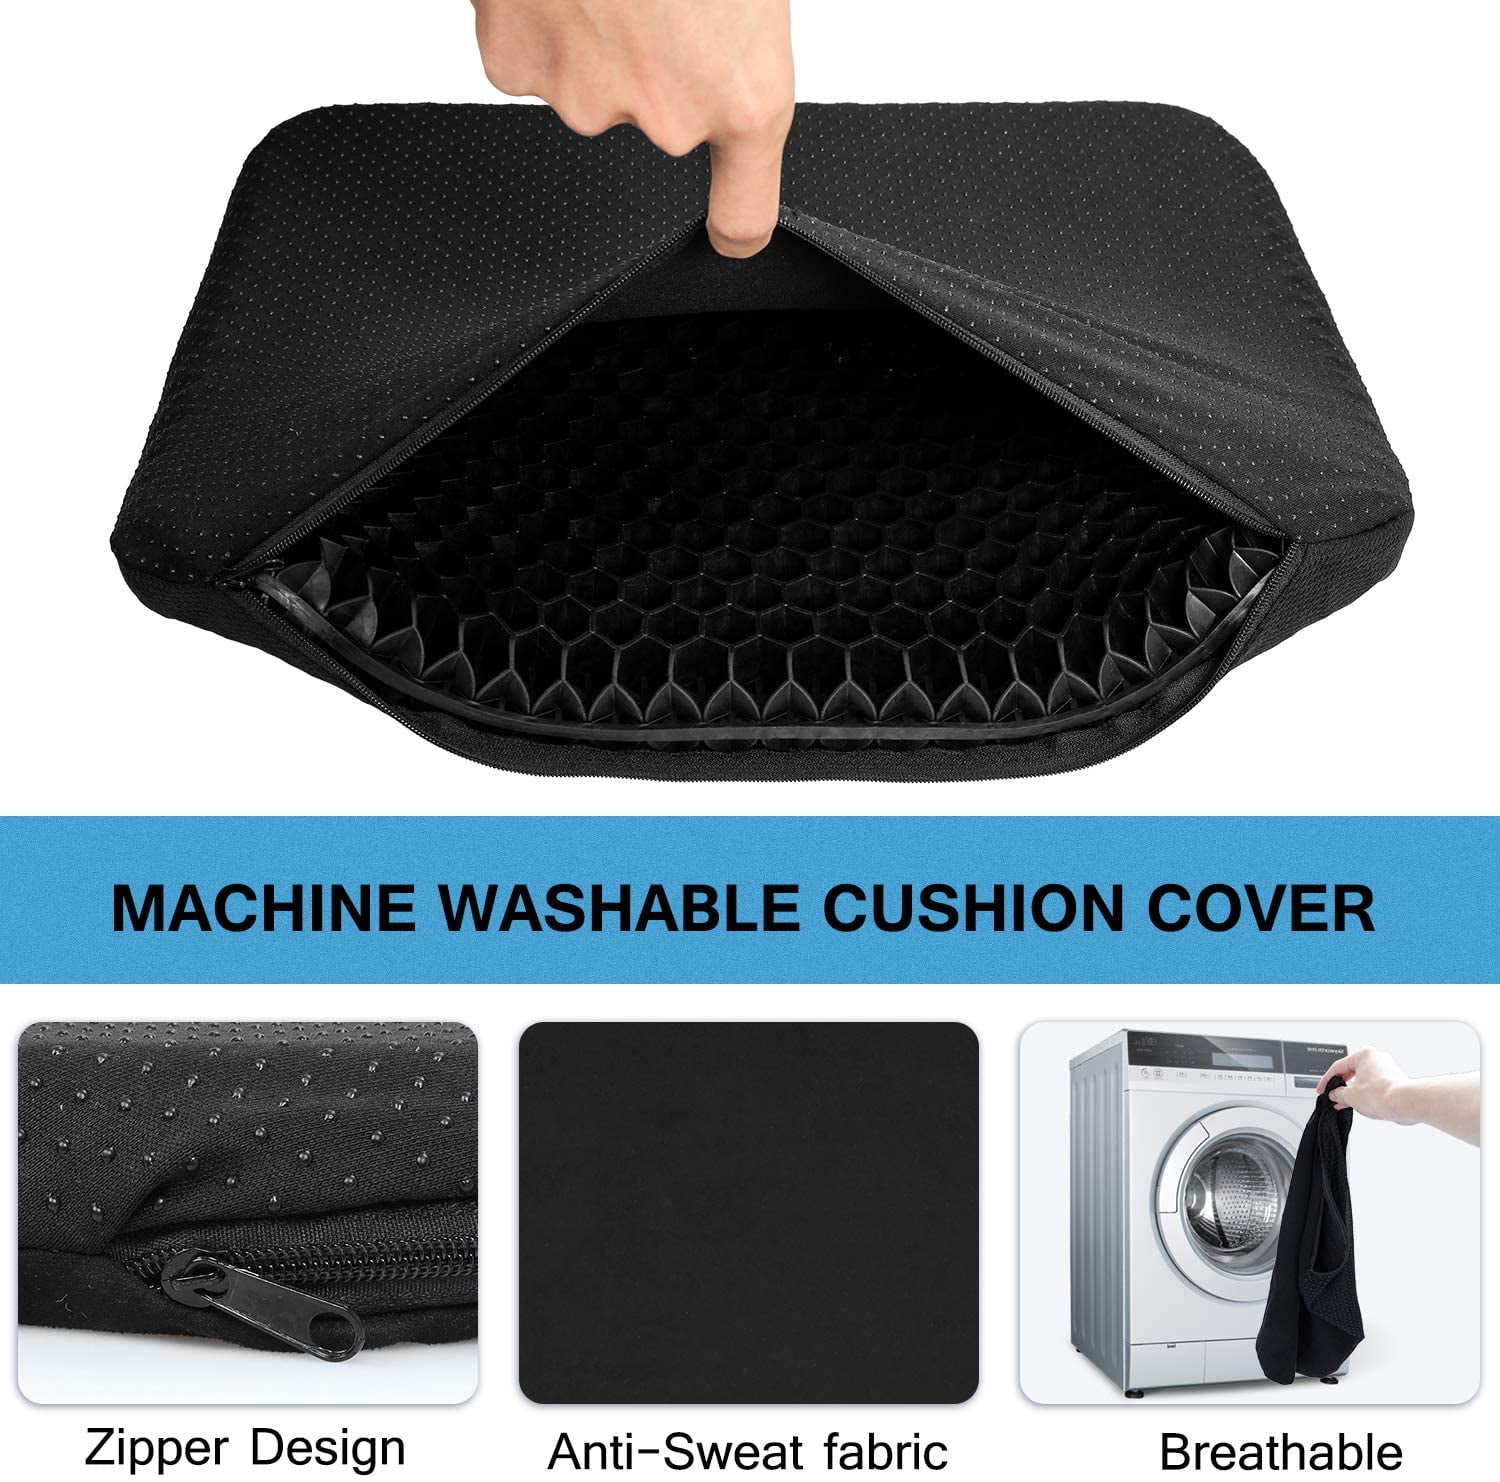 Gel Seat Cushion,SUPTEMPO Enhanced Seat Cushion,Double Gel Egg Honeycomb Design Thick Seat Cushion,for Pressure Relief Back Tailbone Pain,Car Travel Wheelchair with Black Cover 